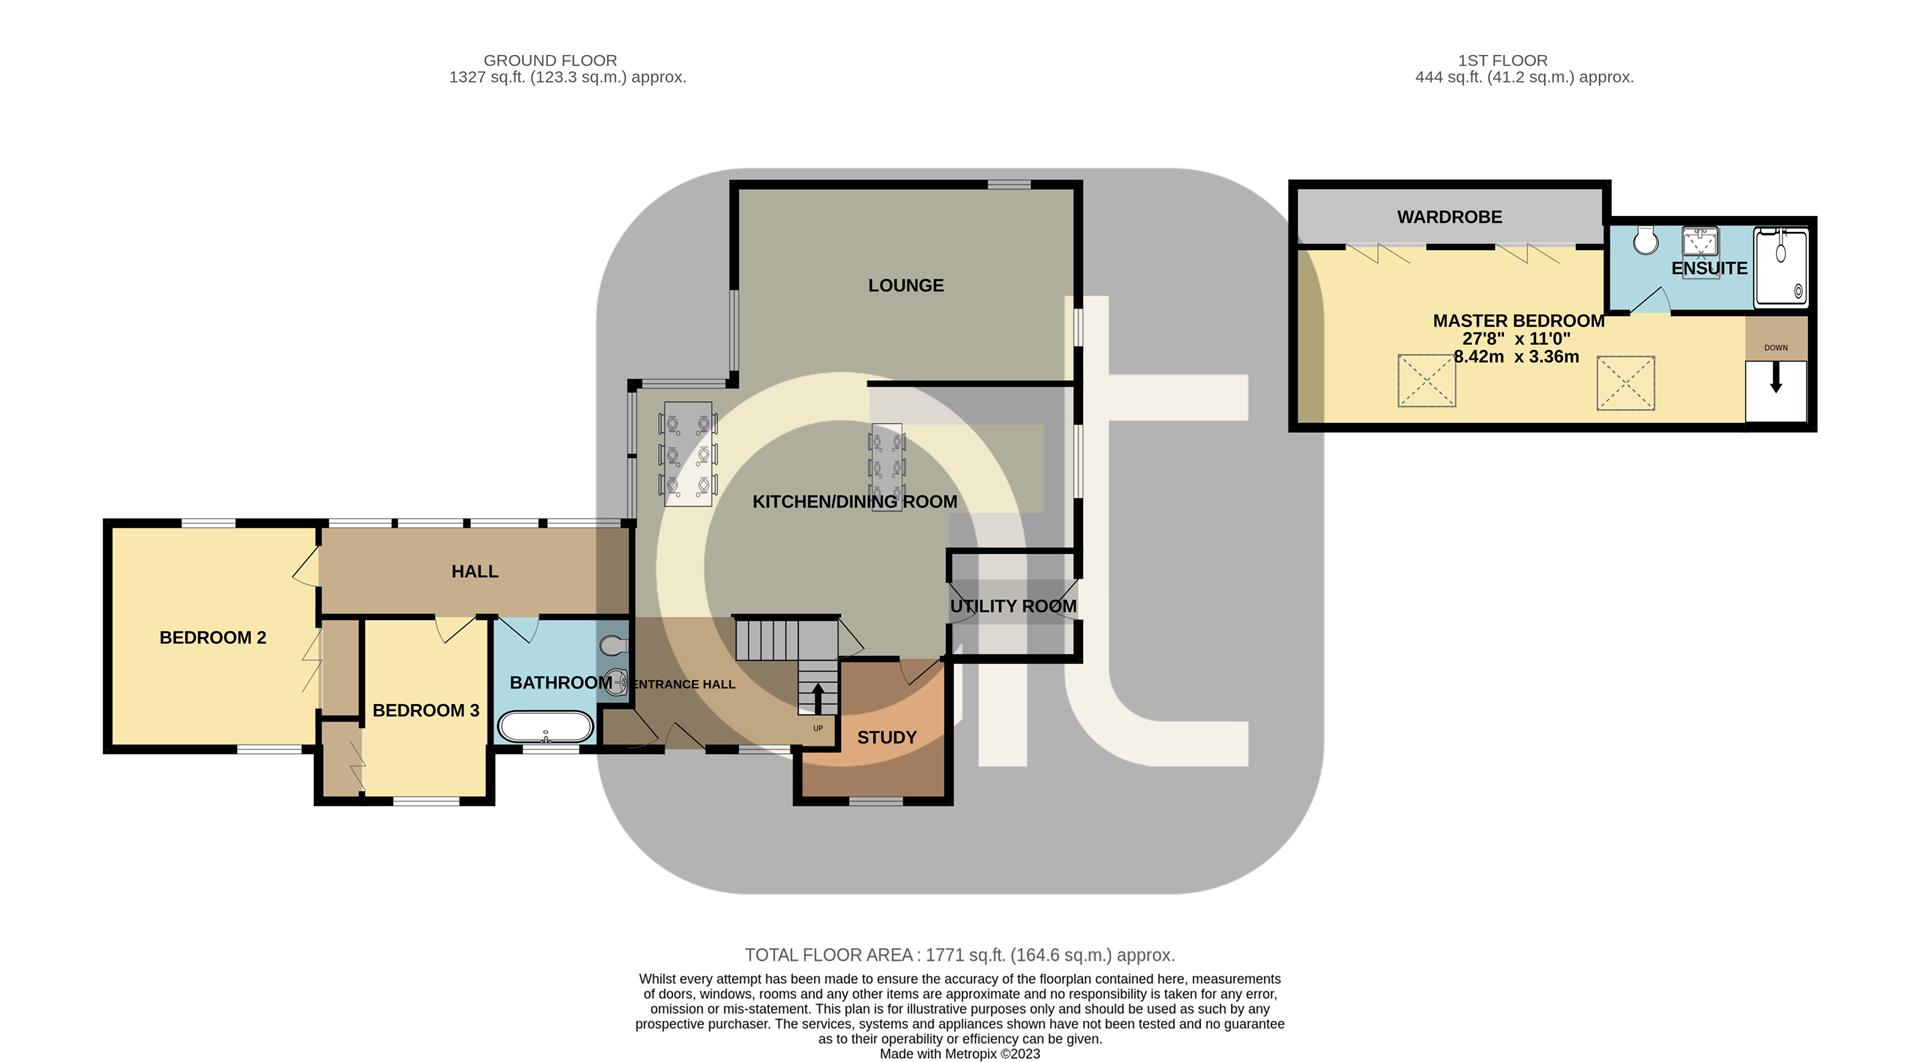 4 bed land (residential) for sale in Airlie House Carronvale Road, Larbert - Property Floorplan